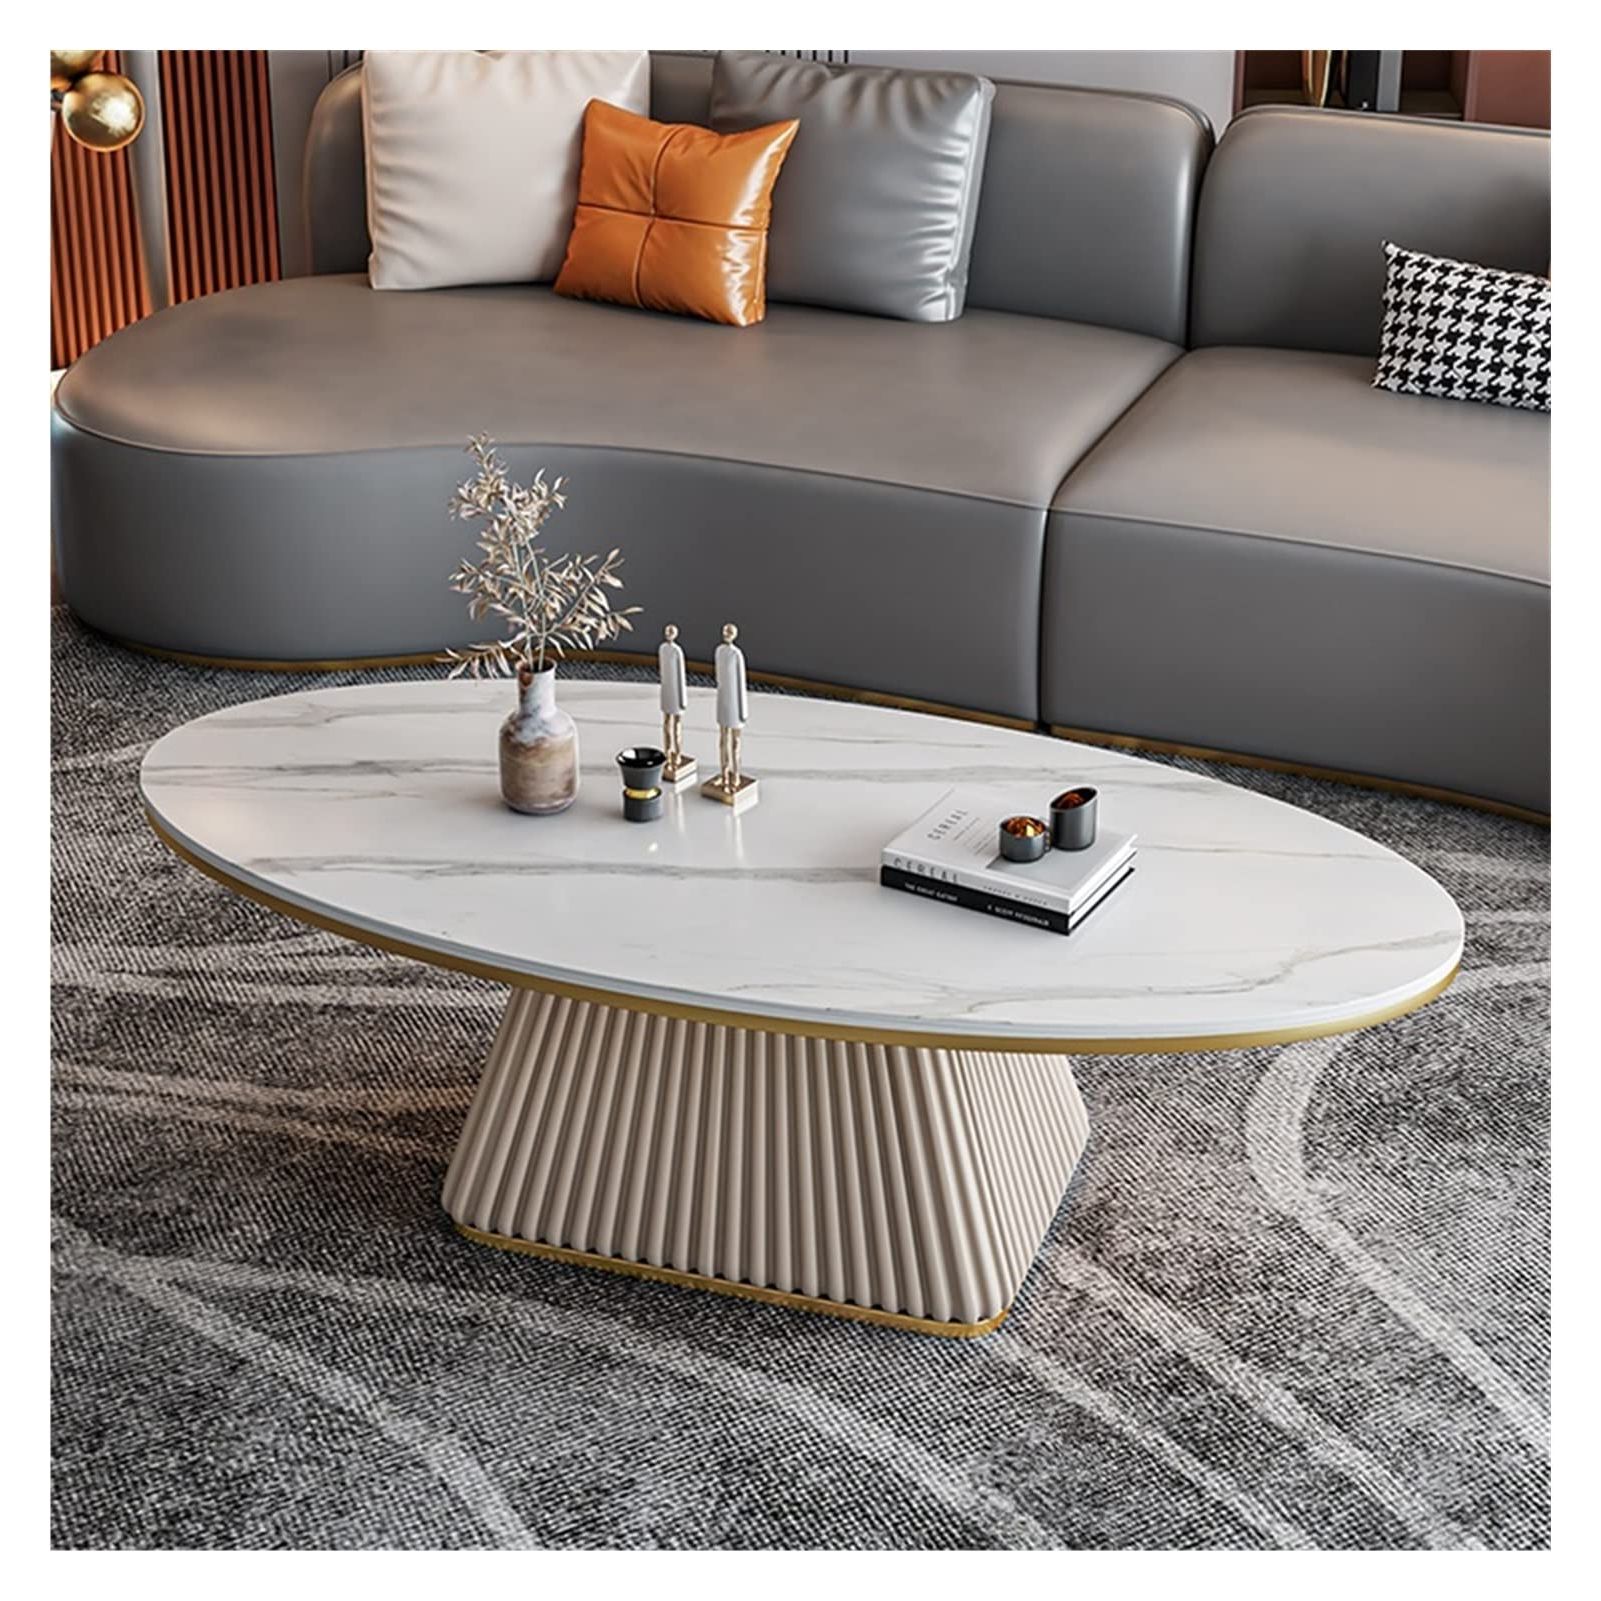 Most Recent Simple Design Coffee Tables Throughout Simple Design Coffee Table Coffee Table Simple Modern Small Apartment  Living Room Home Nordic Creative Oval Coffee Table Minimalist Side Table  For Living Room (style : C) : Amazon.ca: Home (Photo 4 of 10)